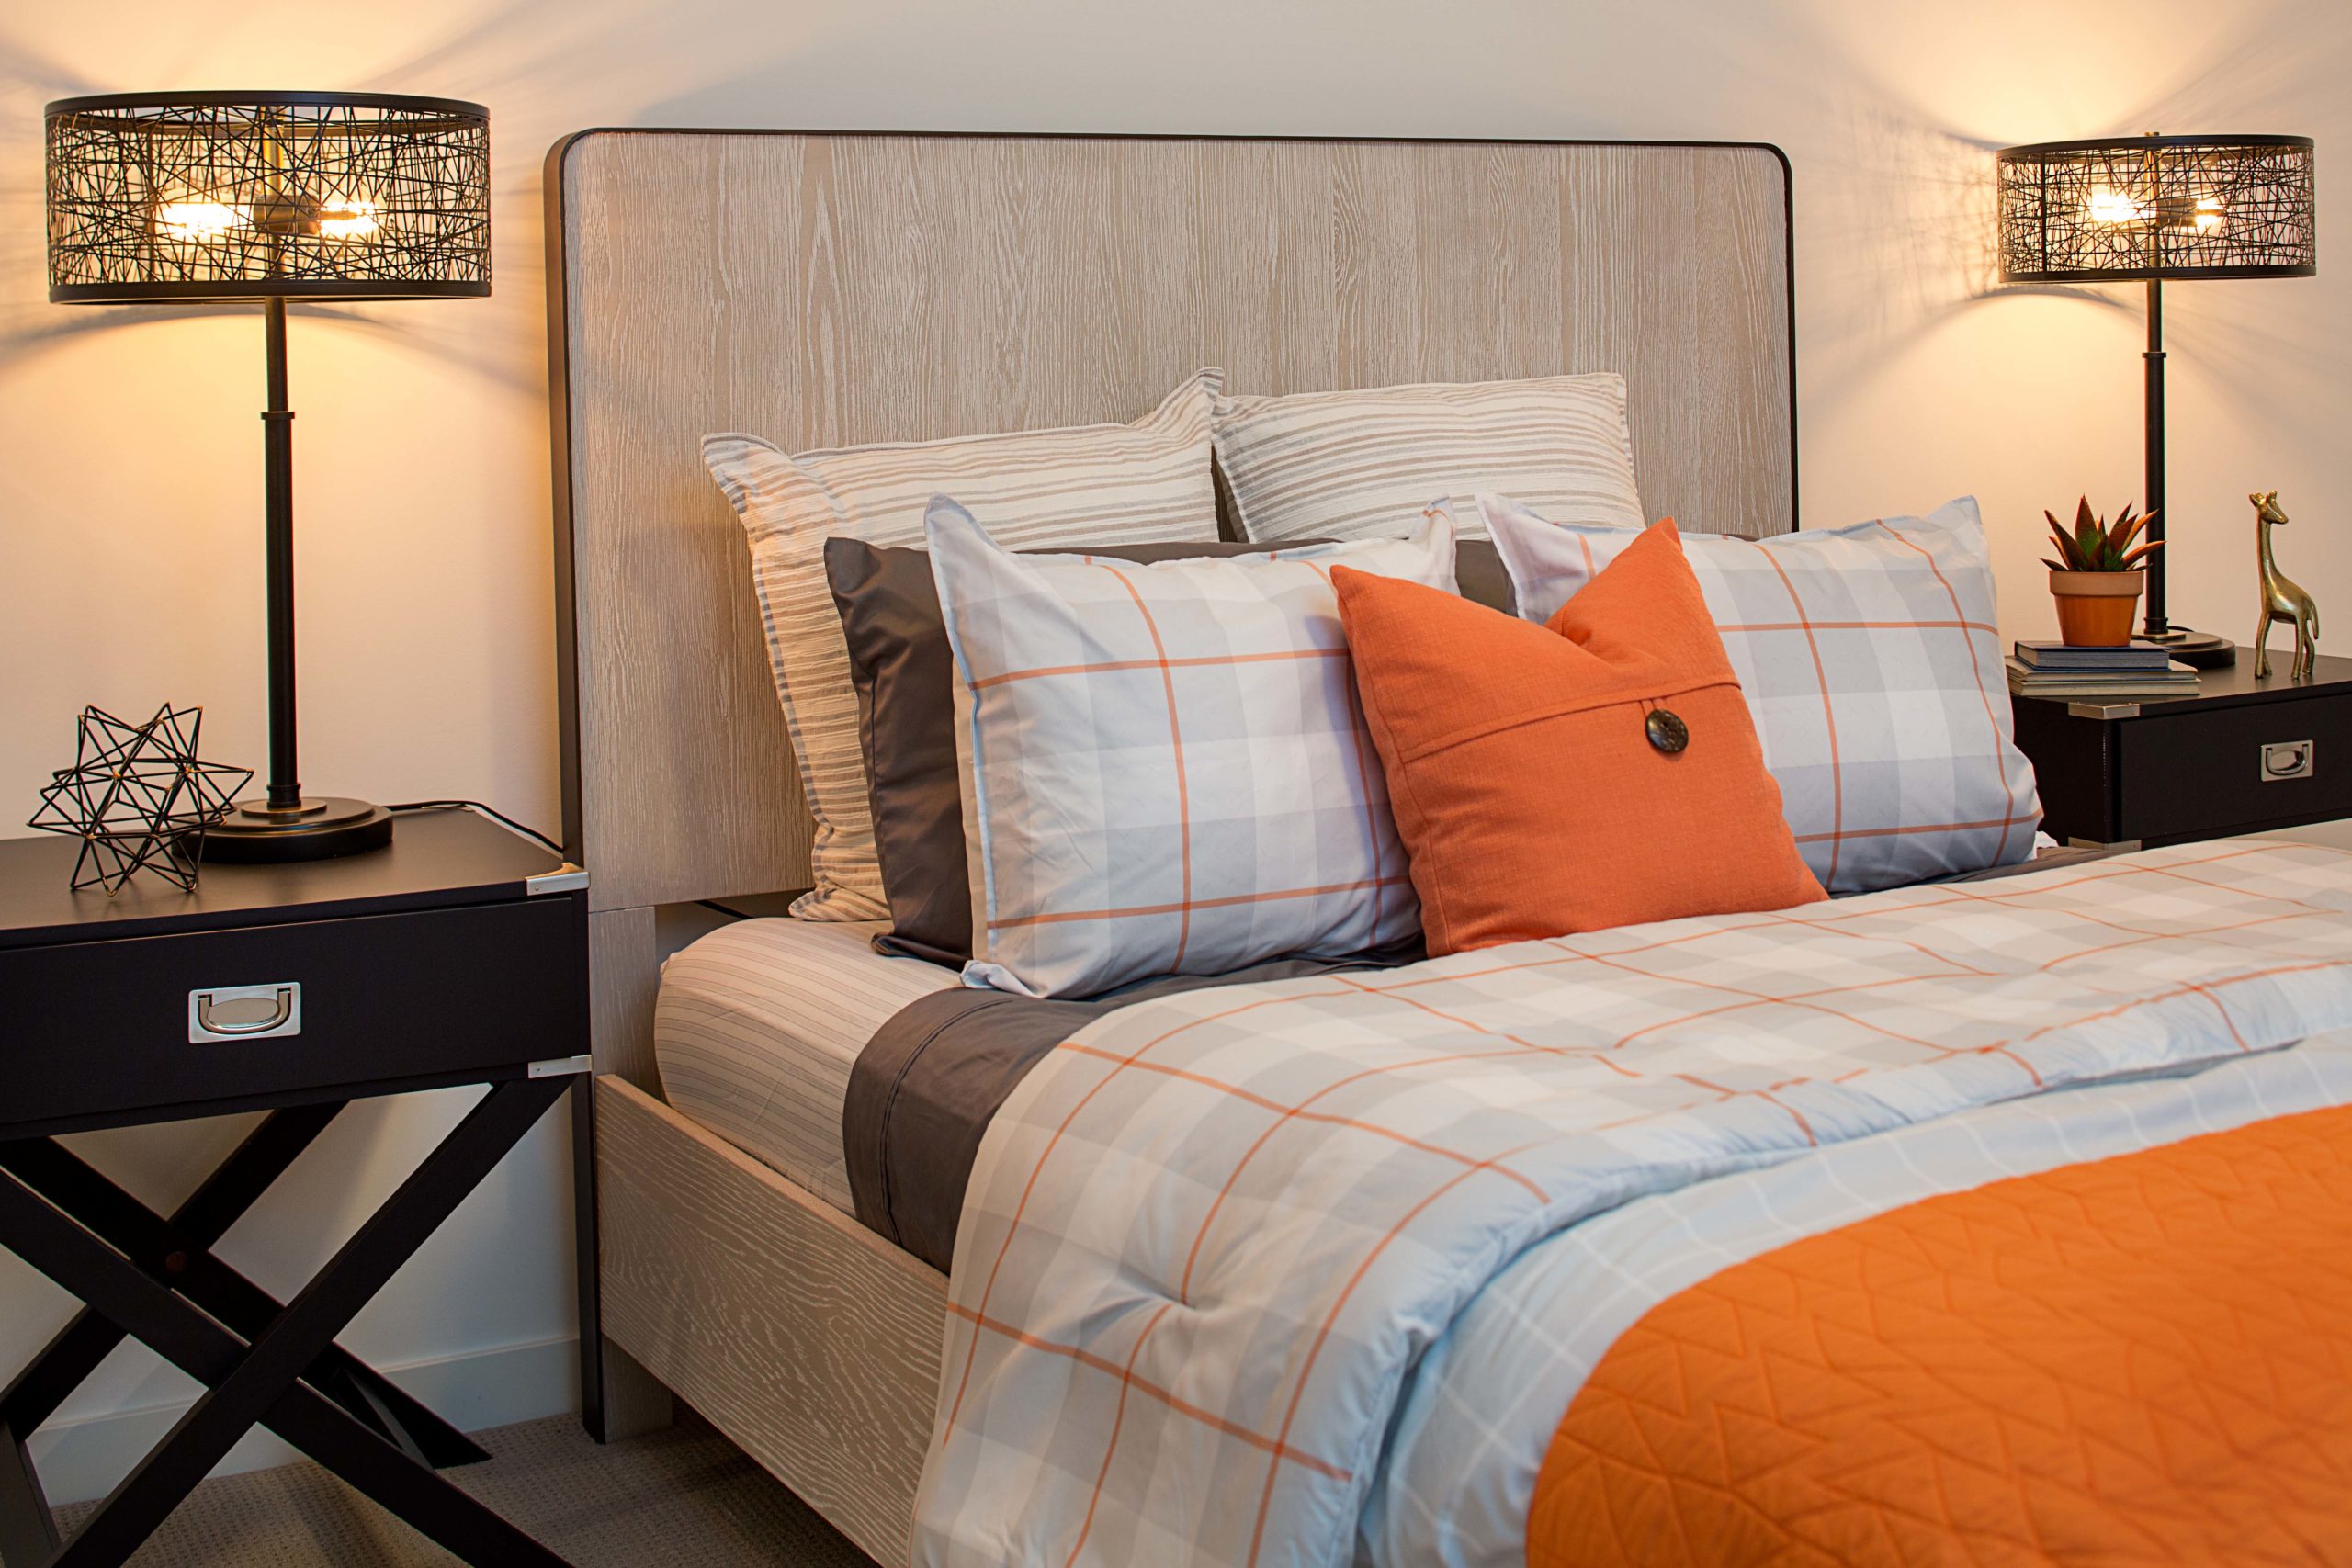 A bed with an orange and gray comforter.